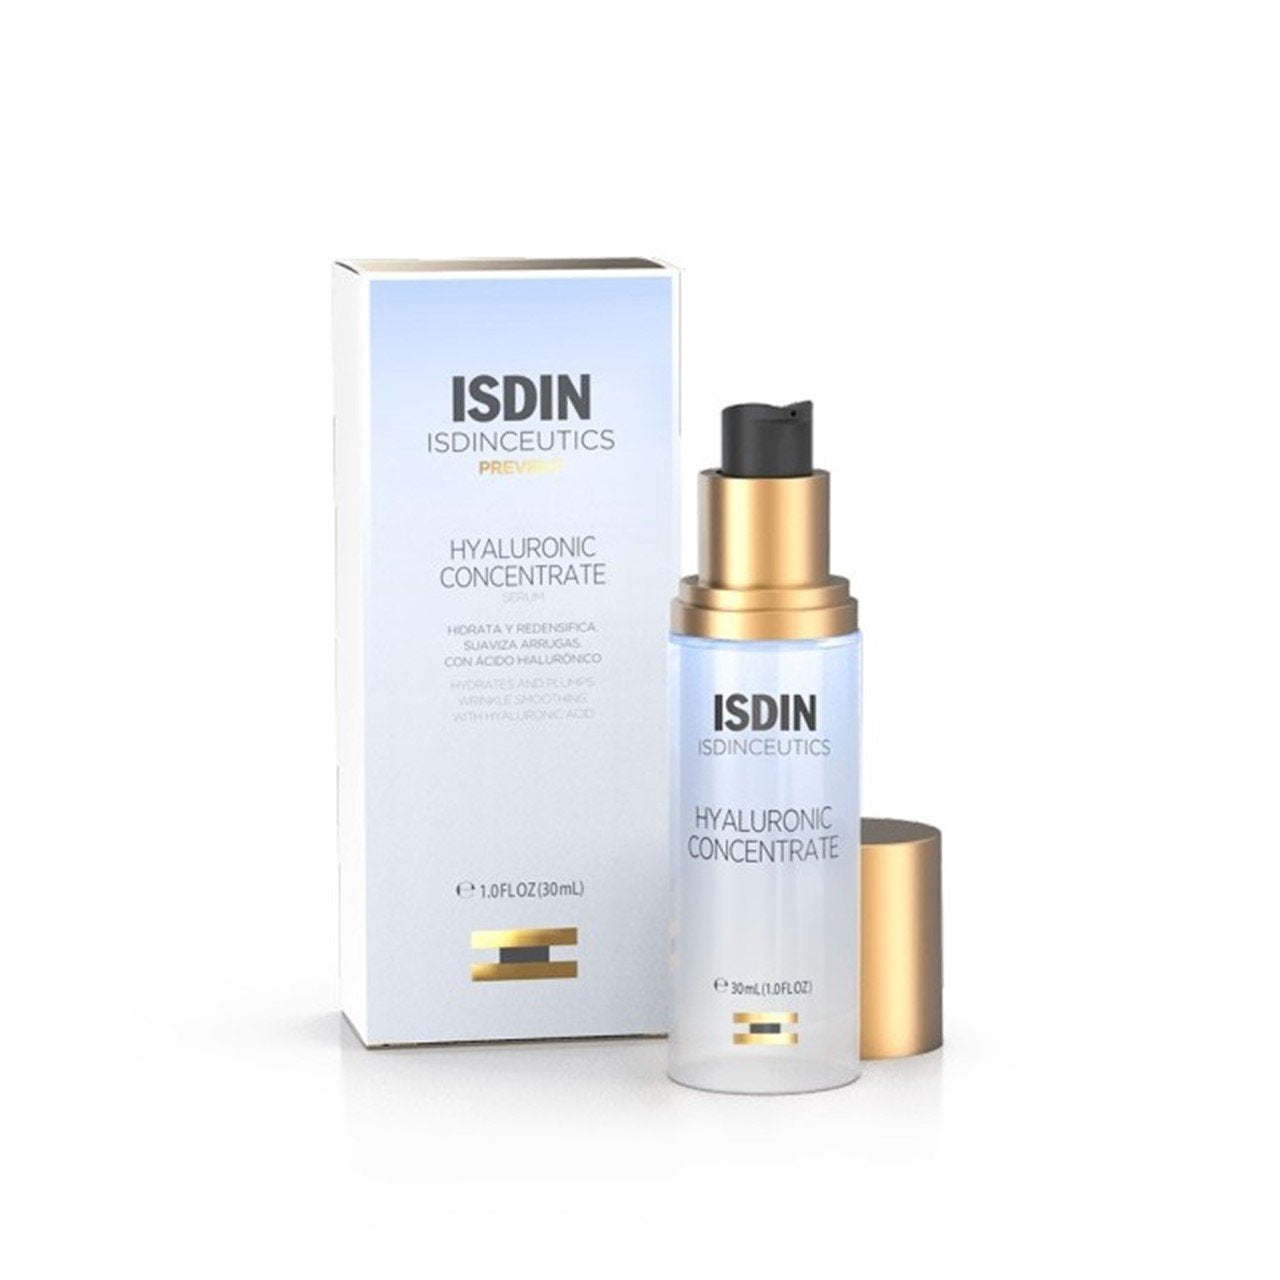 ISDINceutics Hyaluronic Concentrate 30ml